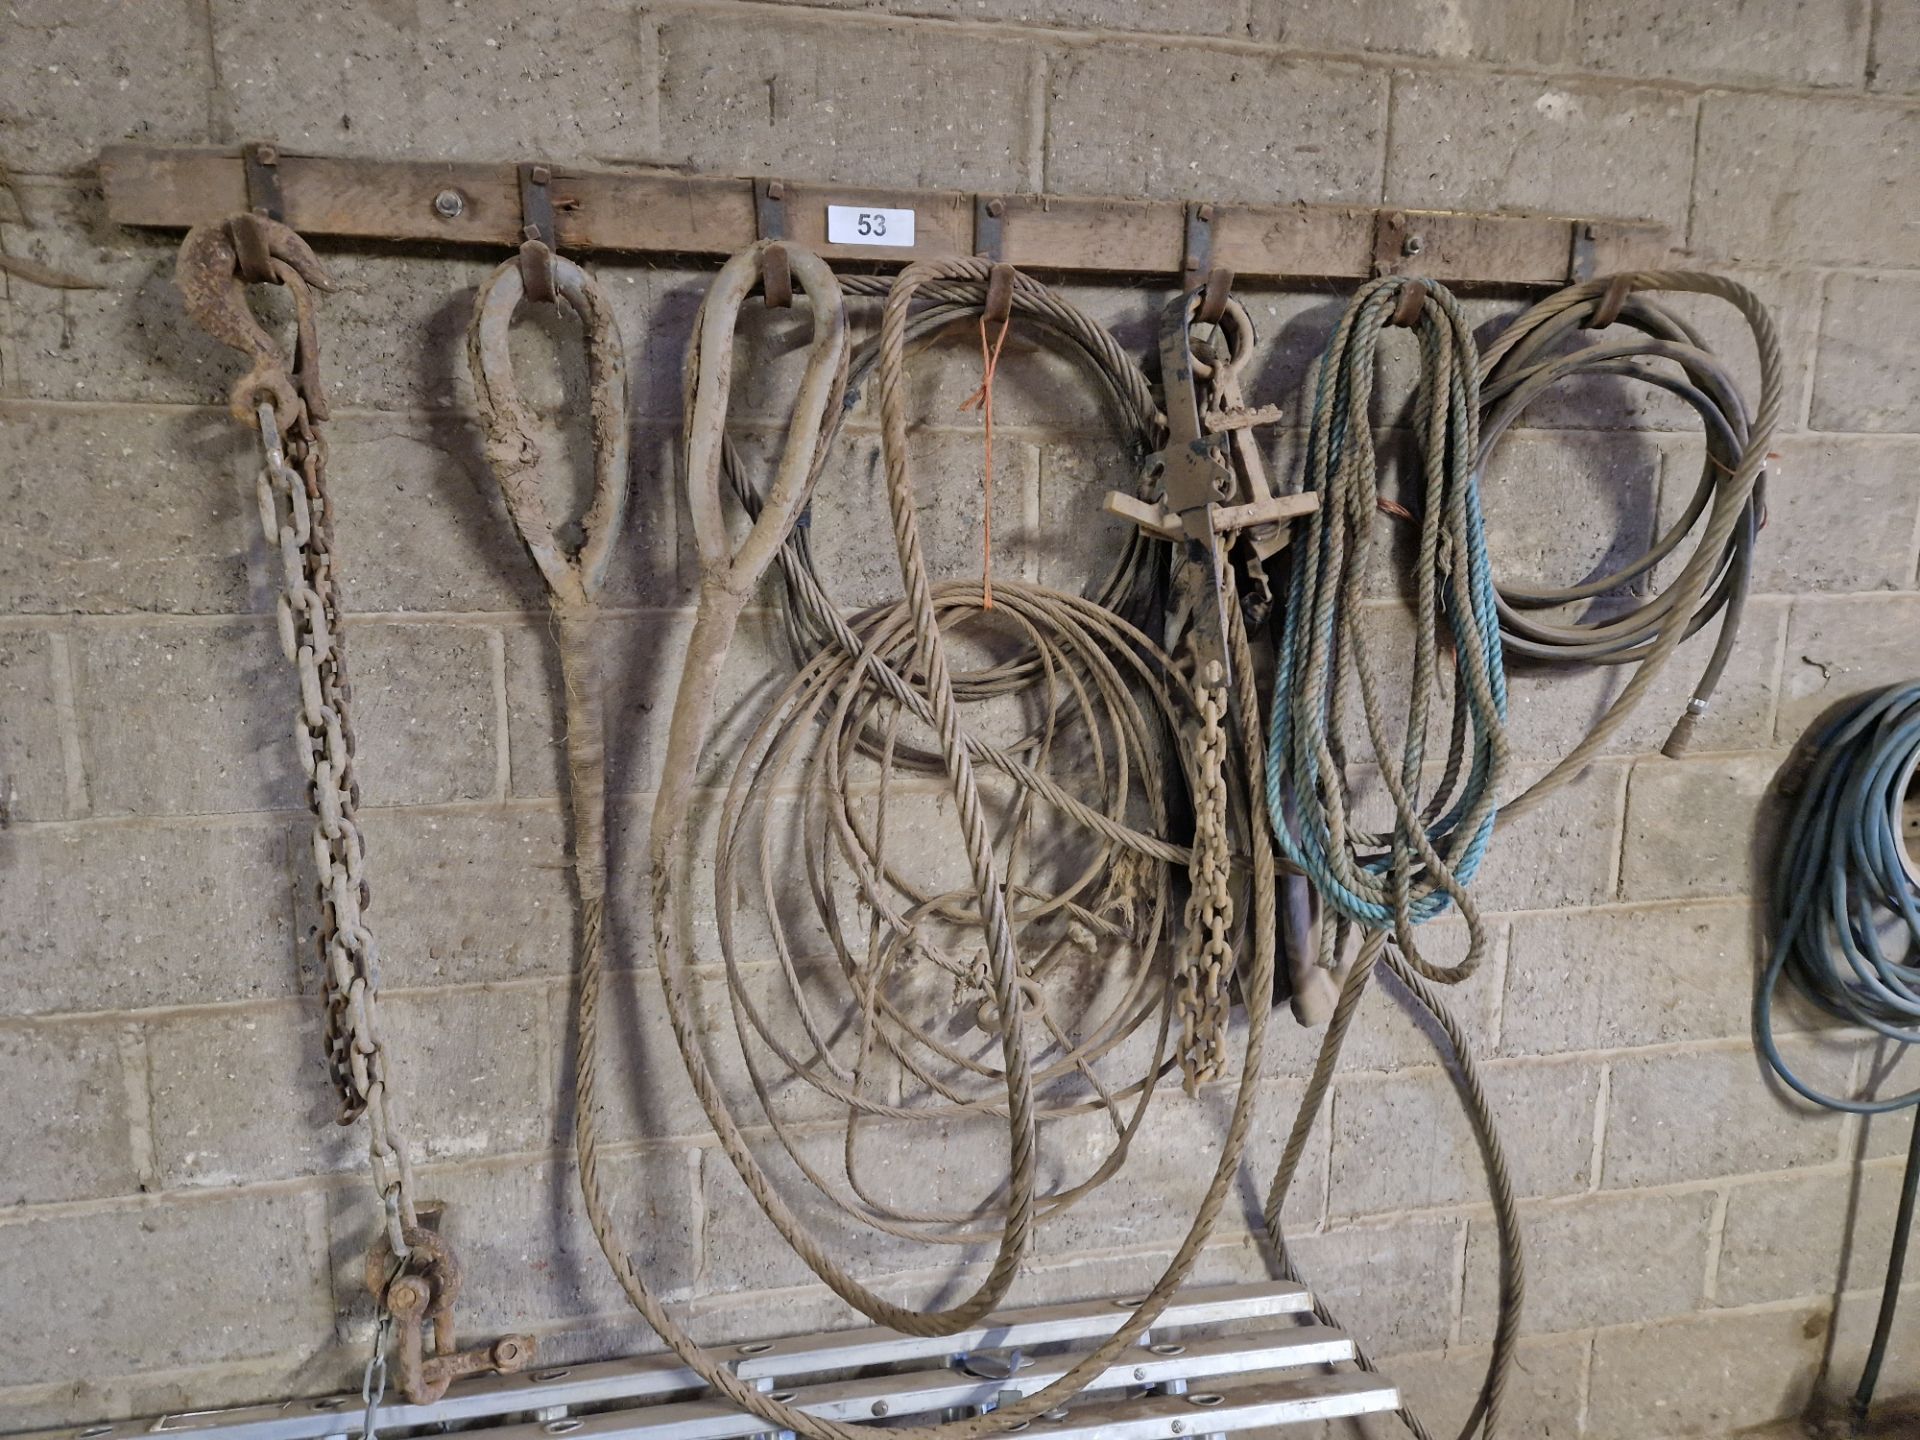 Rack of chains & wire rope - Image 2 of 2